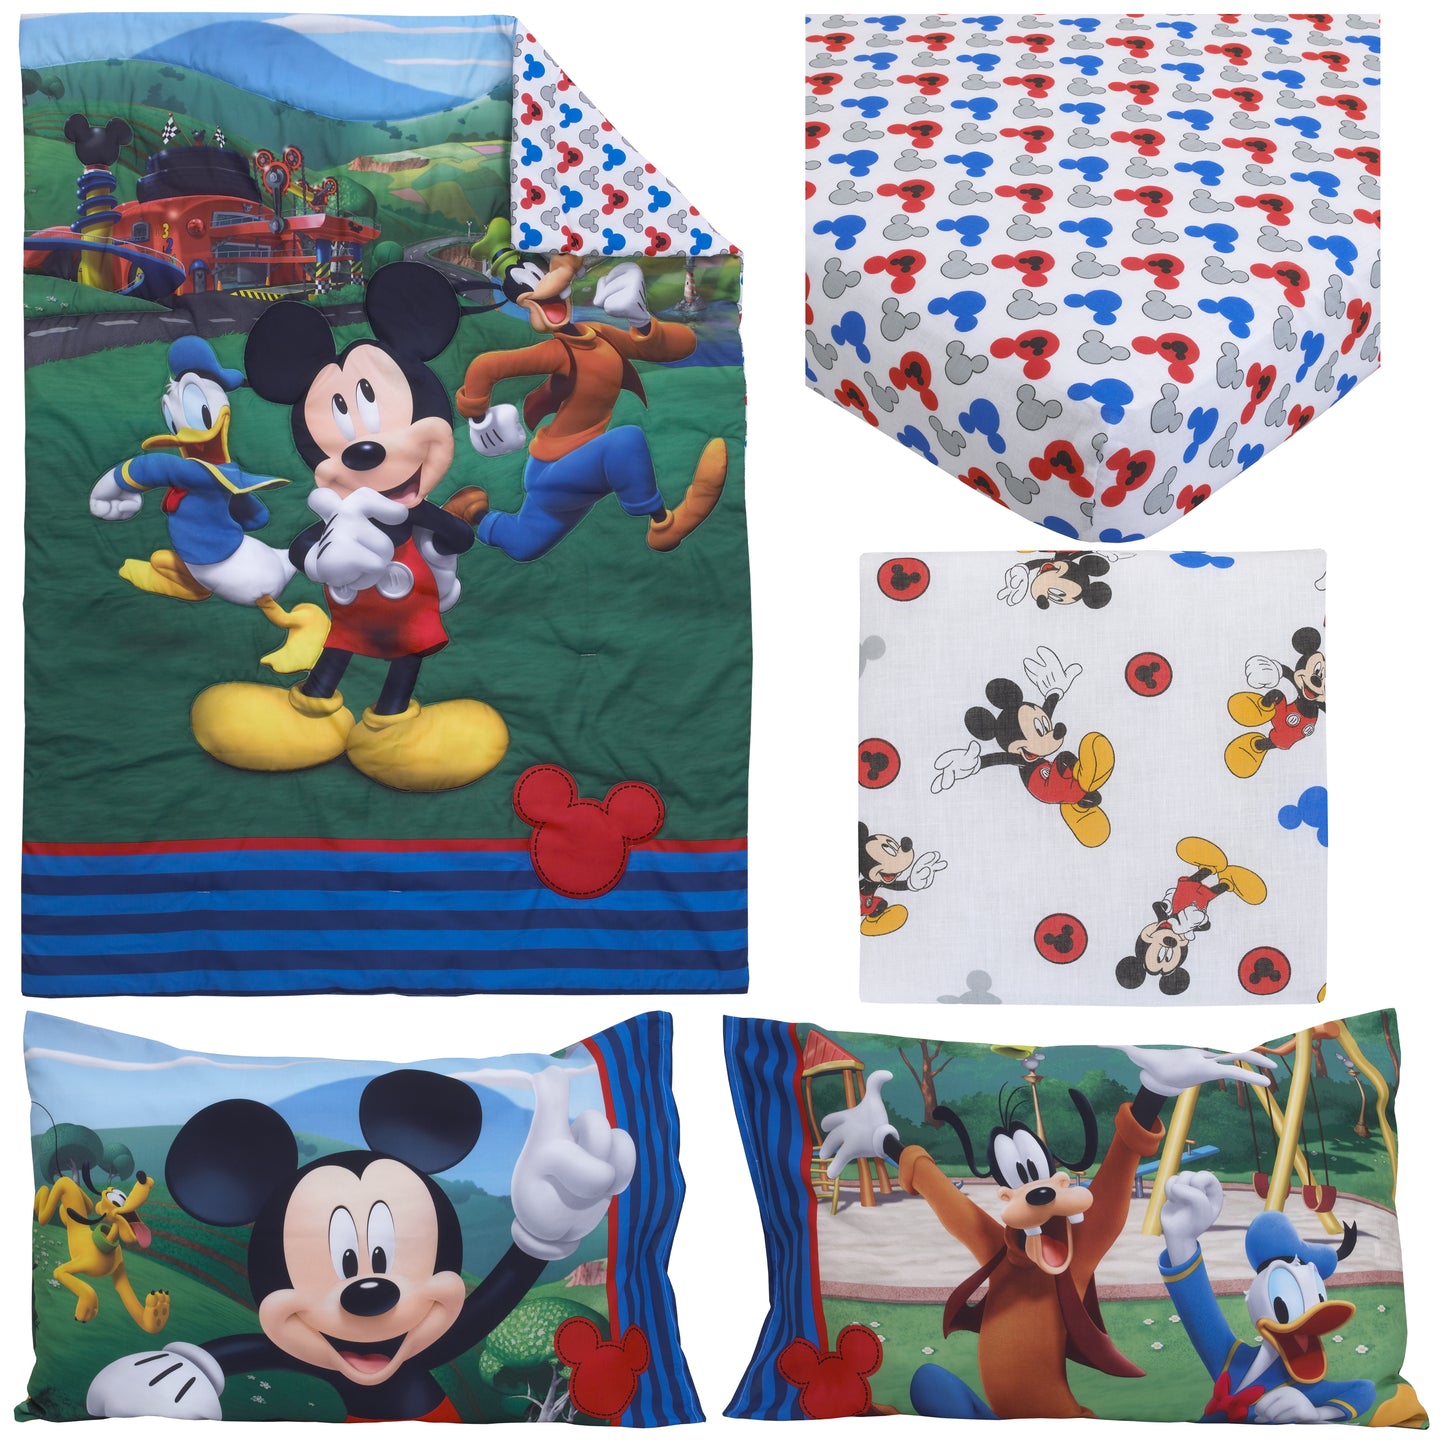 Disney Mickey's Big Adventure Blue, Red, Yellow and Green 4 Piece Toddler Bed Set - Comforter, Fitted Bottom Sheet, Flat Top Sheet, Reversible Pillowcase